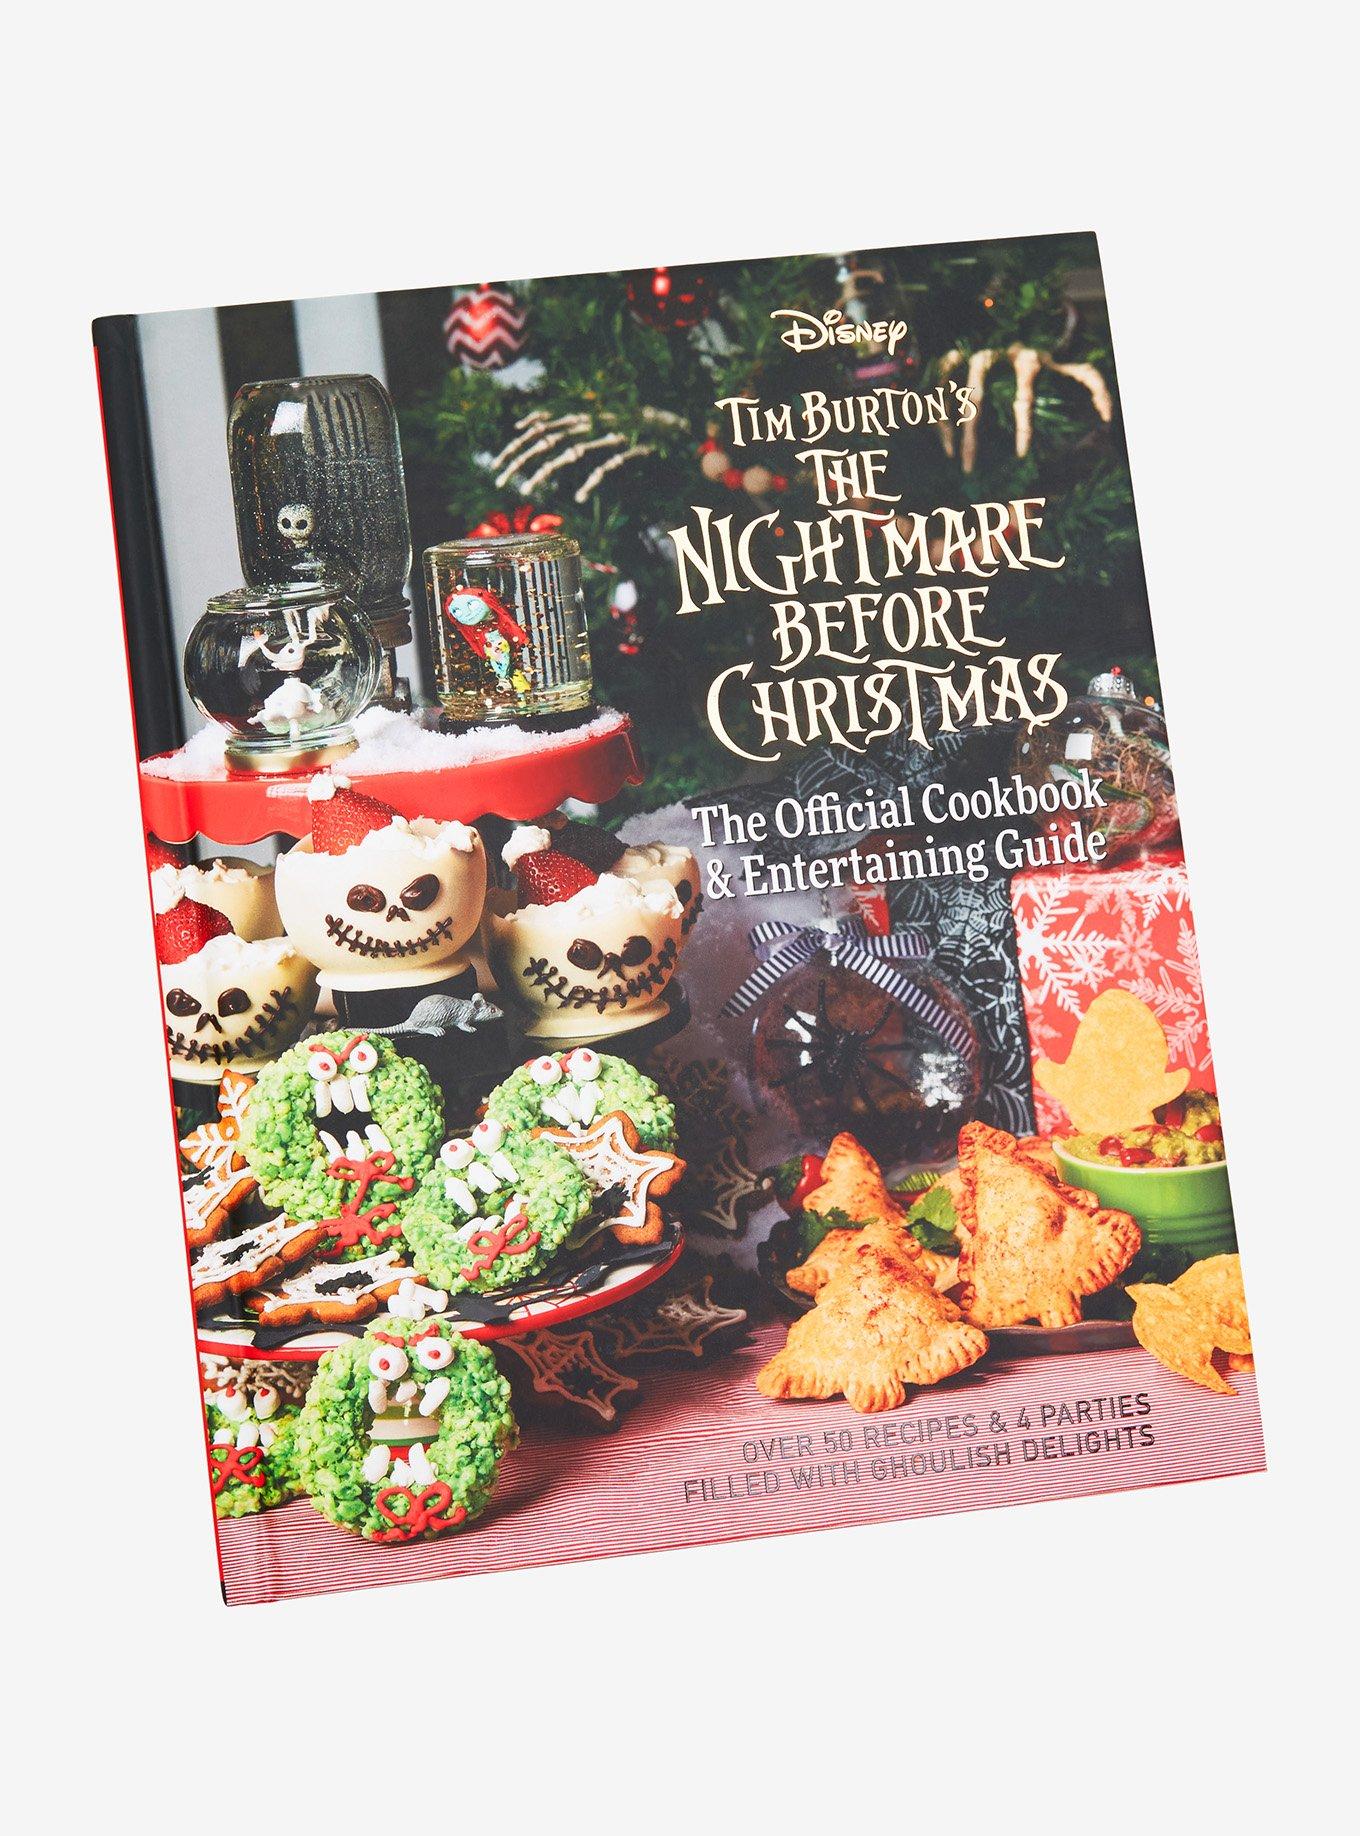 The Nightmare Before Christmas: The Official Cookbook